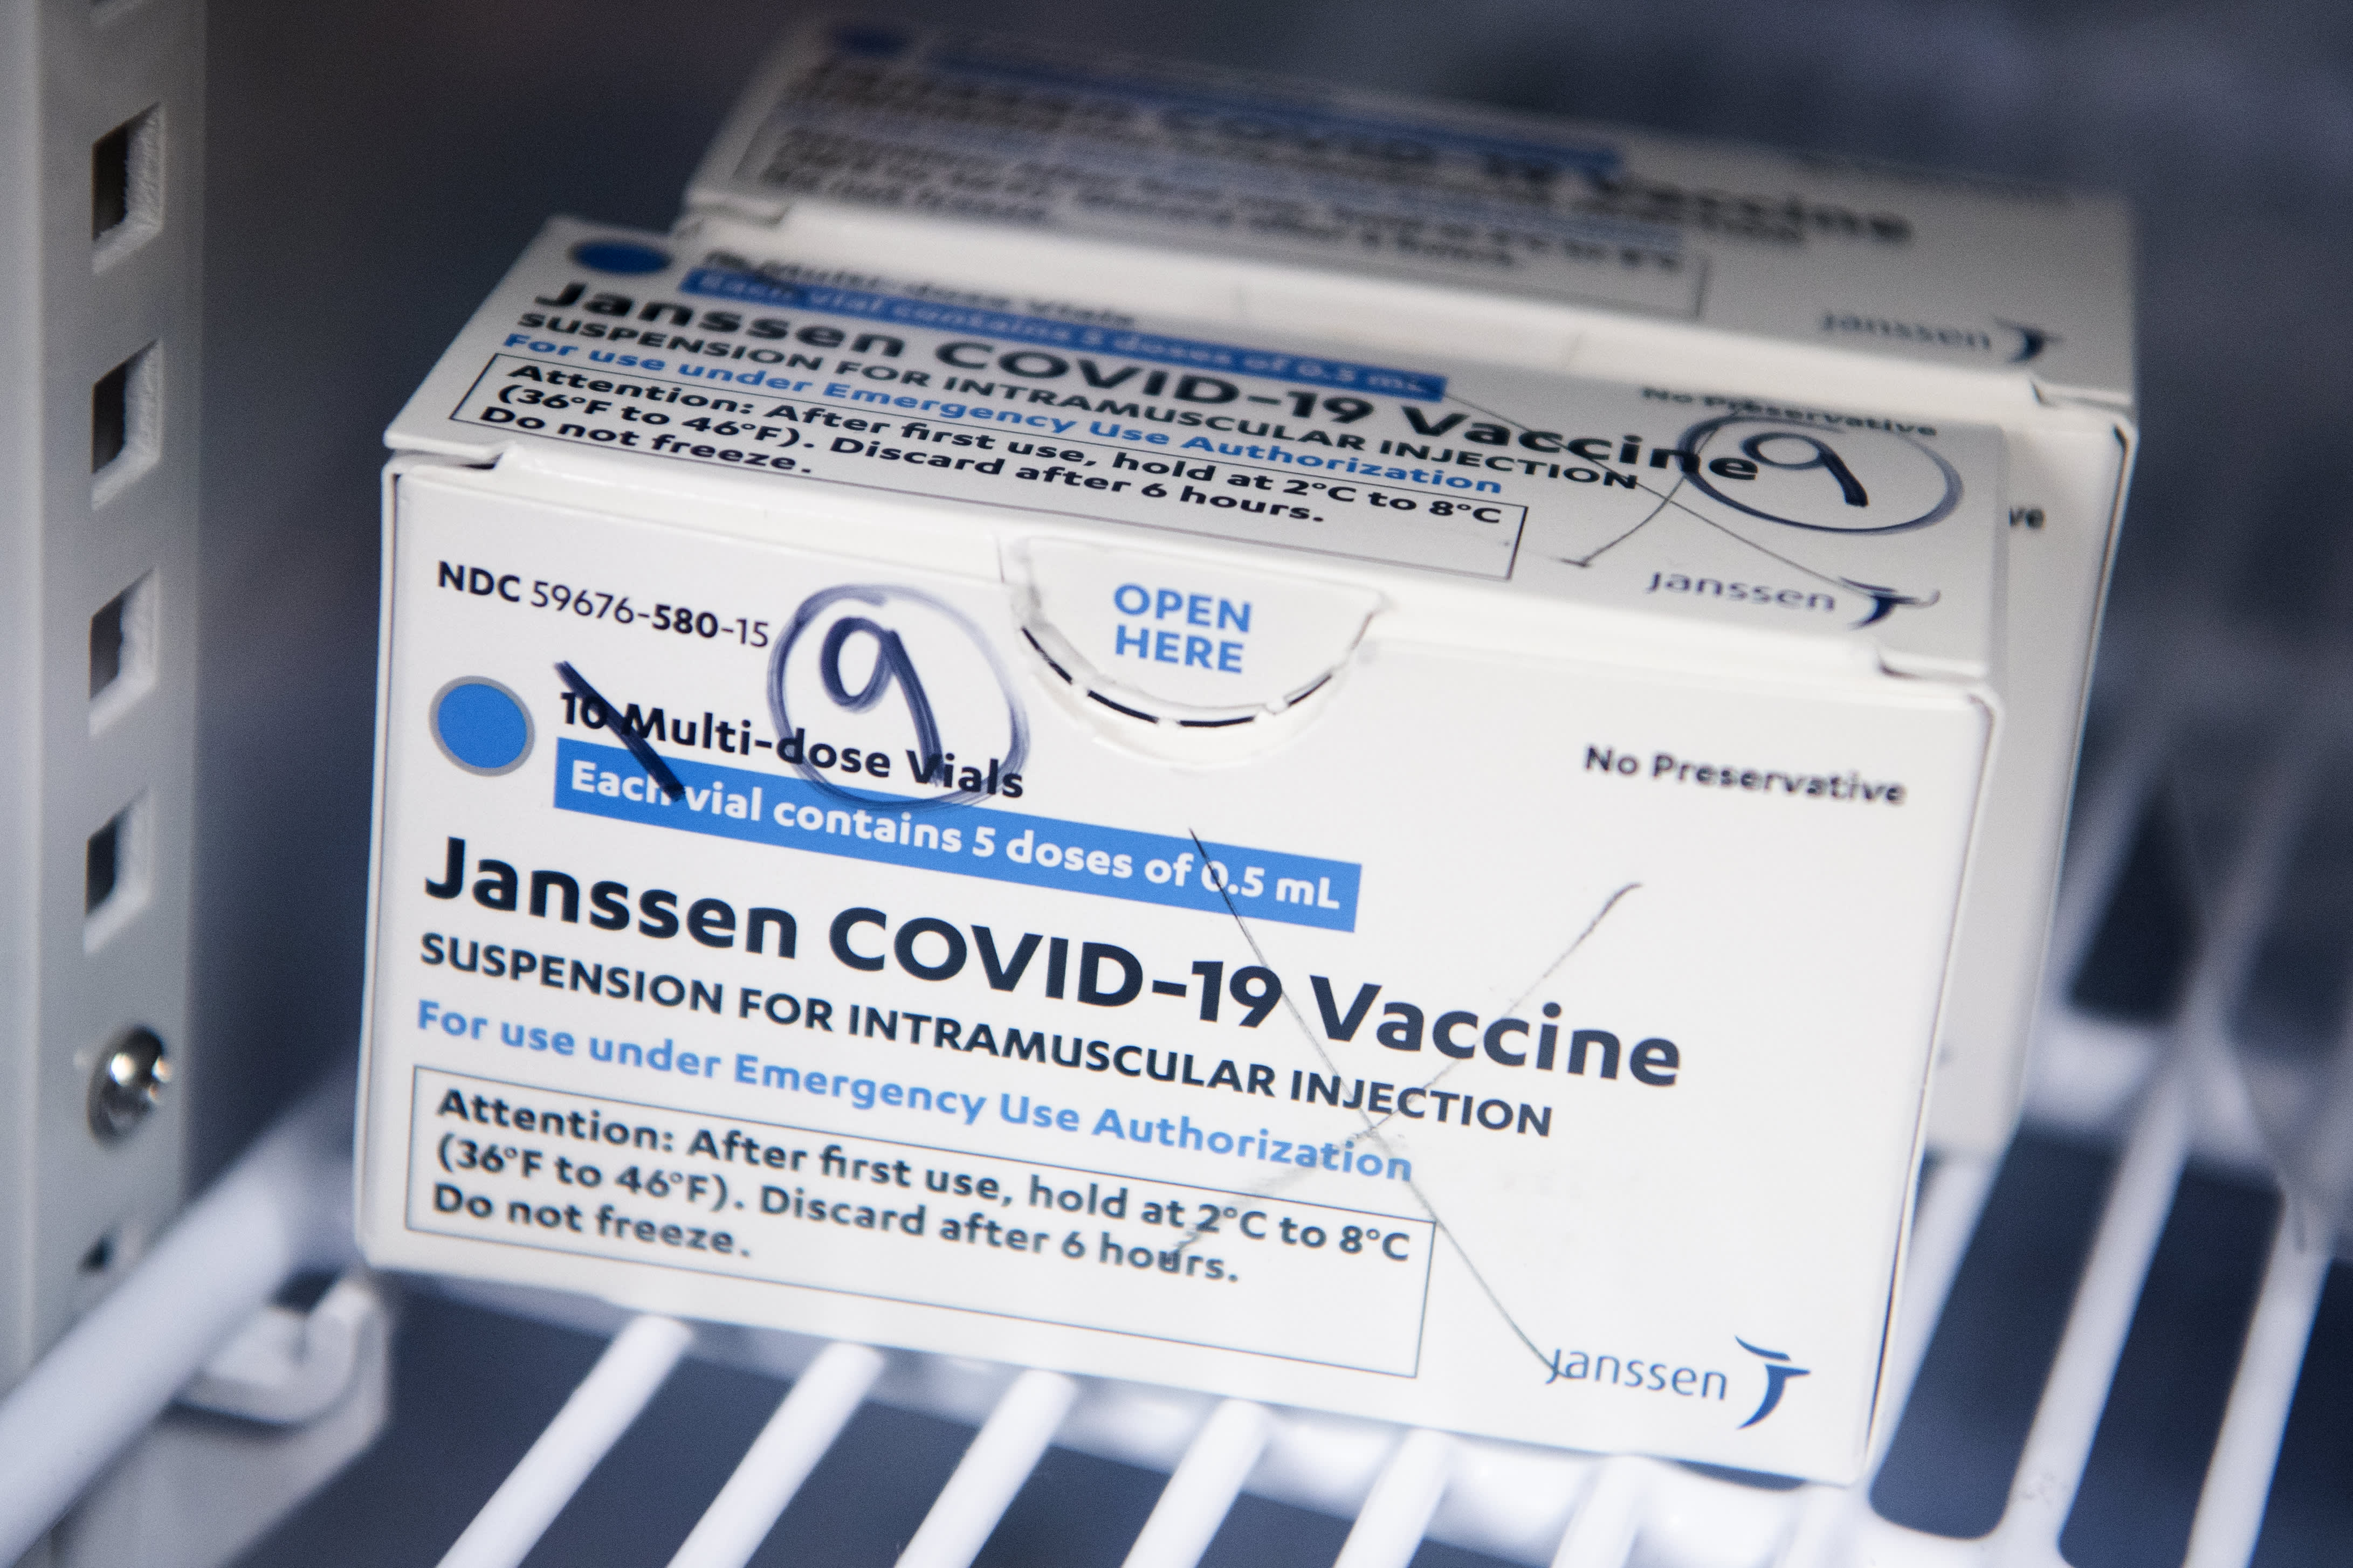 Discontinuation of J&J Covid vaccine will not affect US vaccination schedule, says doctor